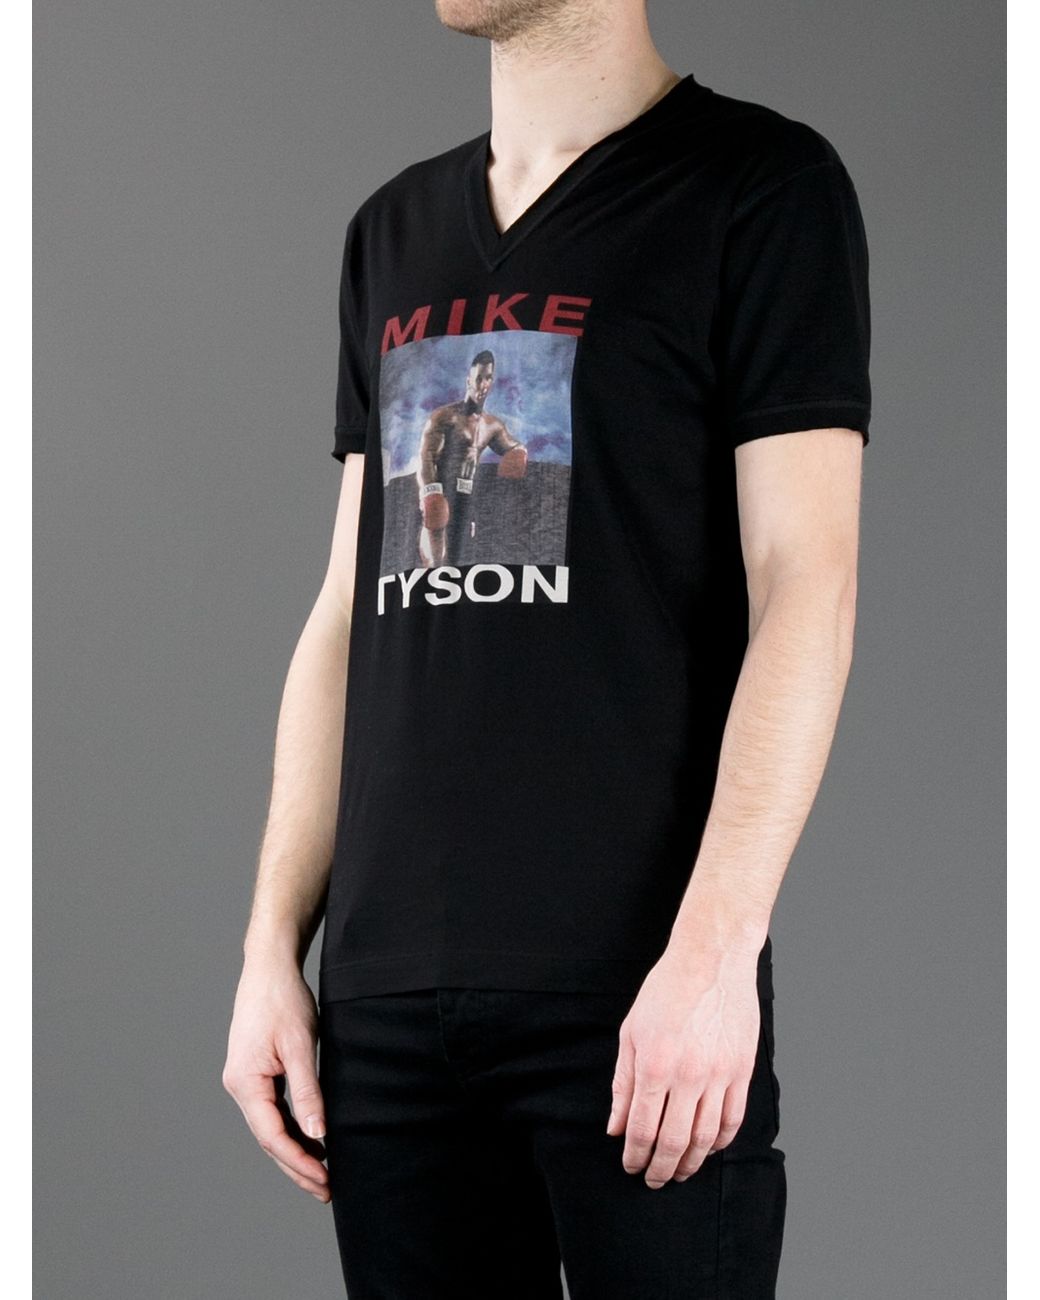 Dolce & Gabbana Printed Mike Tyson T-Shirt in Black for Men | Lyst